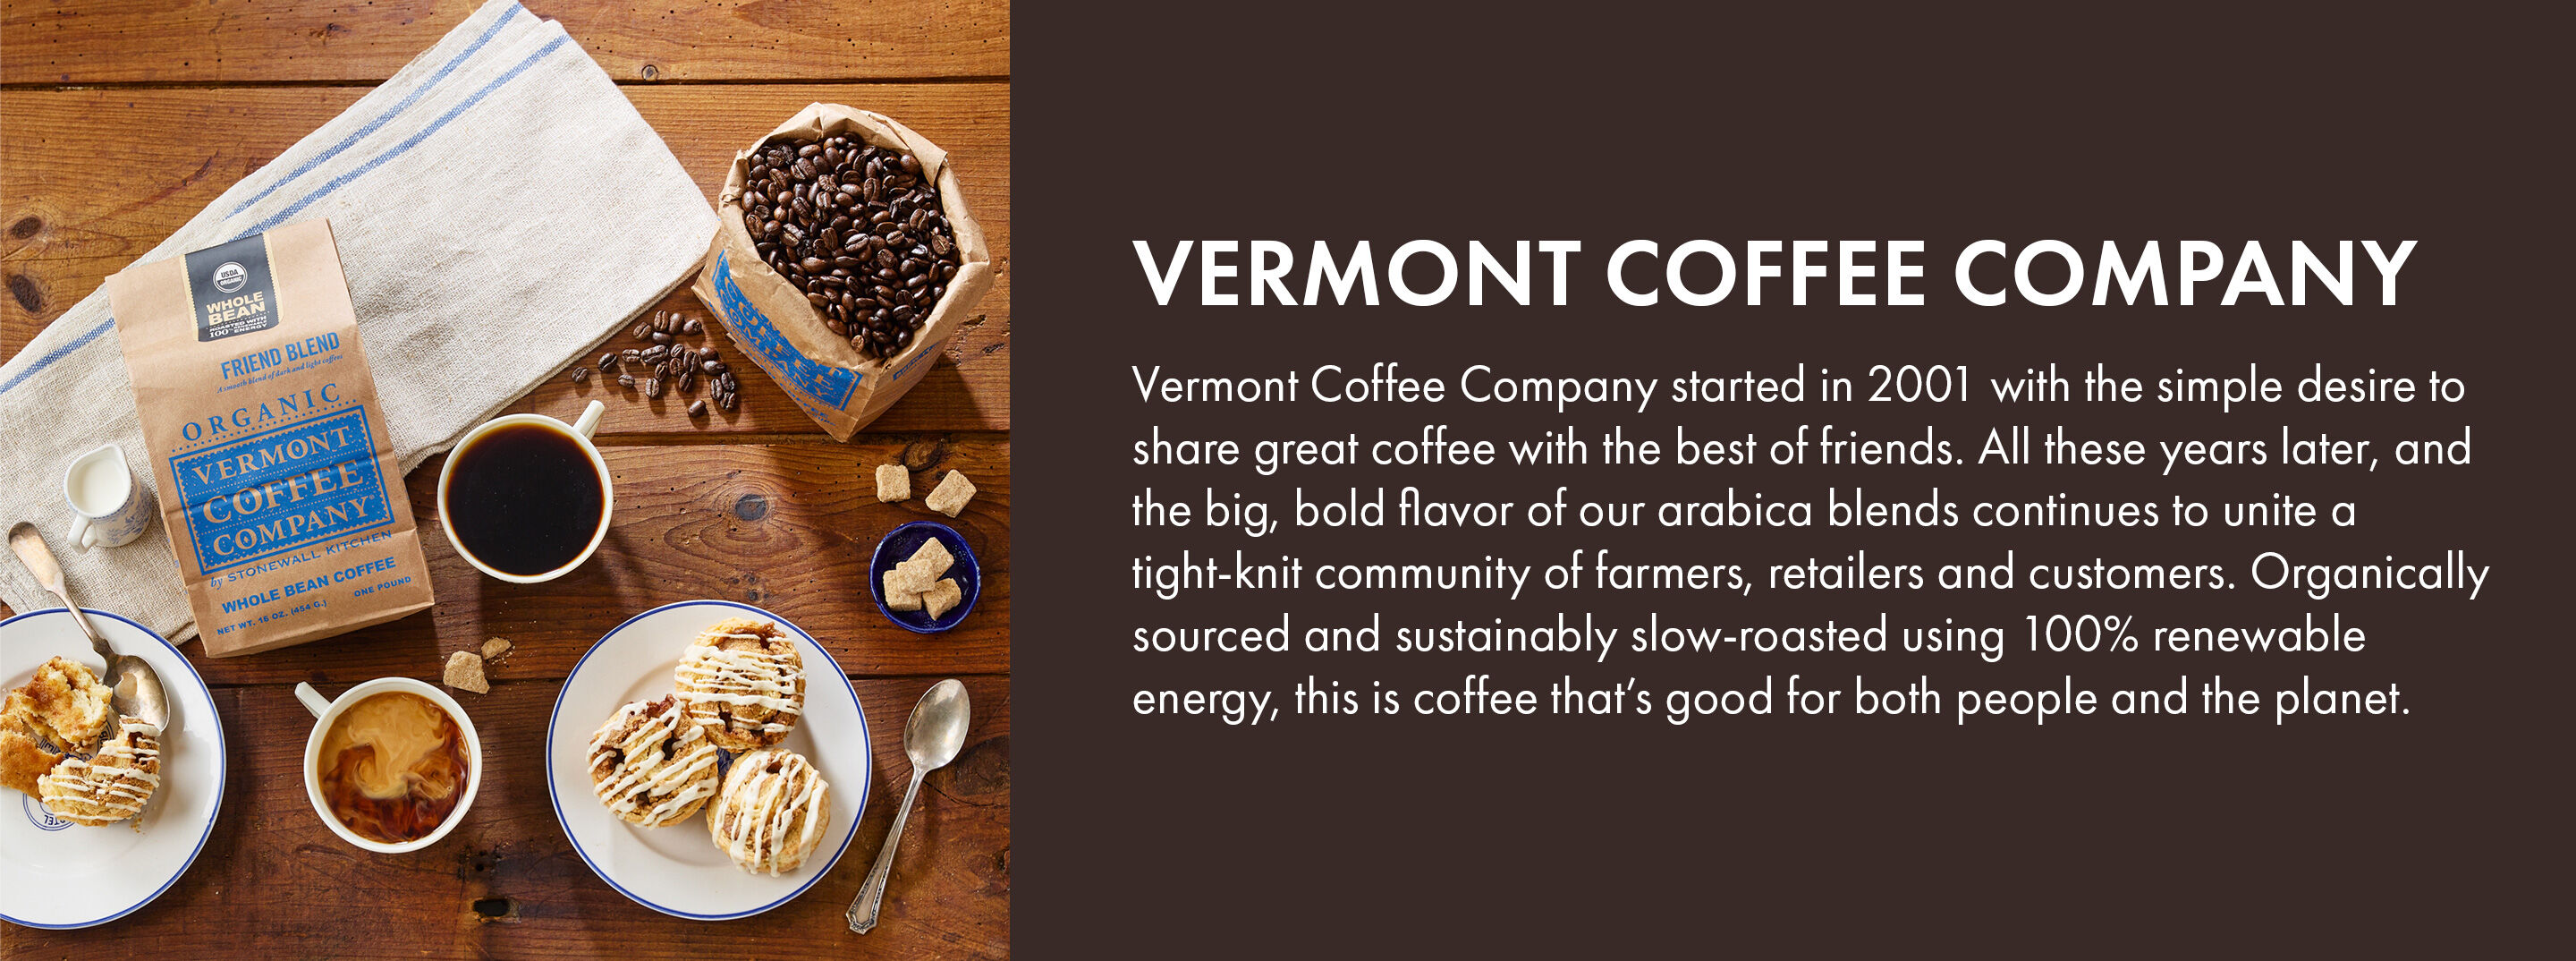 Vermont Coffee Company | Vermont Coffee Company started in 2001 with the simple desire to share great coffee with the best of friends. All these years later, and the big, bold flavor of our arabica blends continues to unite a tight-knit community of farmers, retailers and customers. Organically sourced and sustainably slow-roasted using 100% renewable energy, this is coffee that's good for both people and the planet.